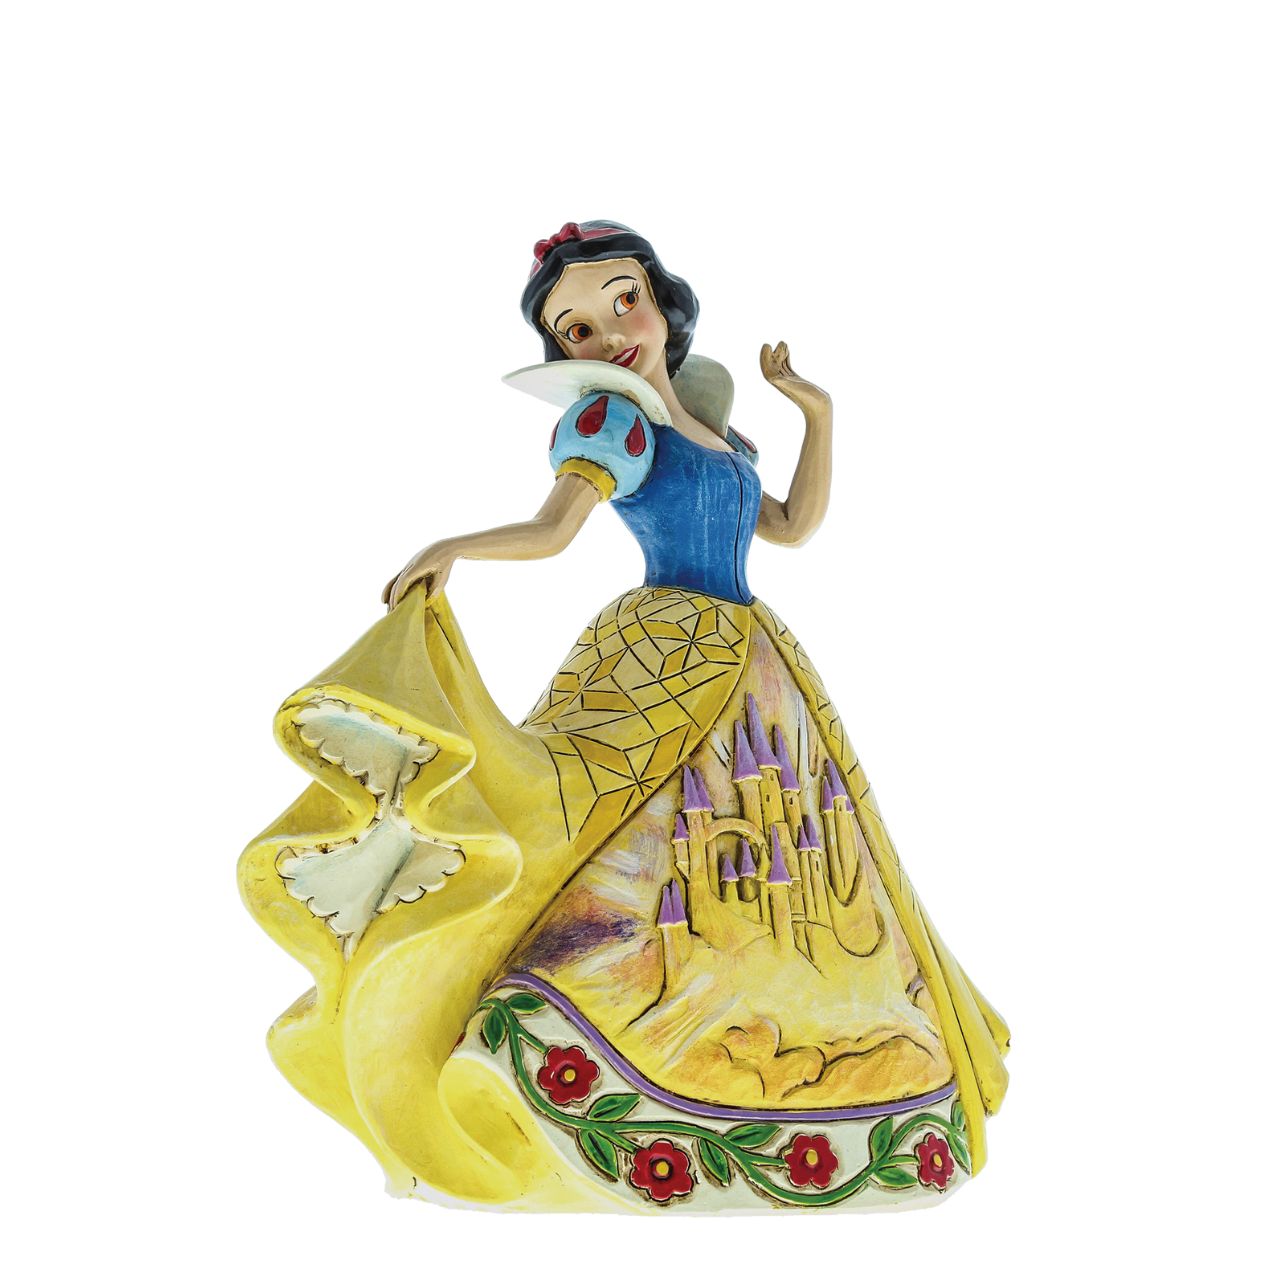 Castles In the Clouds Snow White Figurine  Snow White's Prince did come and escorted her to a majestic castle in the sky. Designed by award winning artist and sculptor, Jim Shore for the Disney Traditions brand.